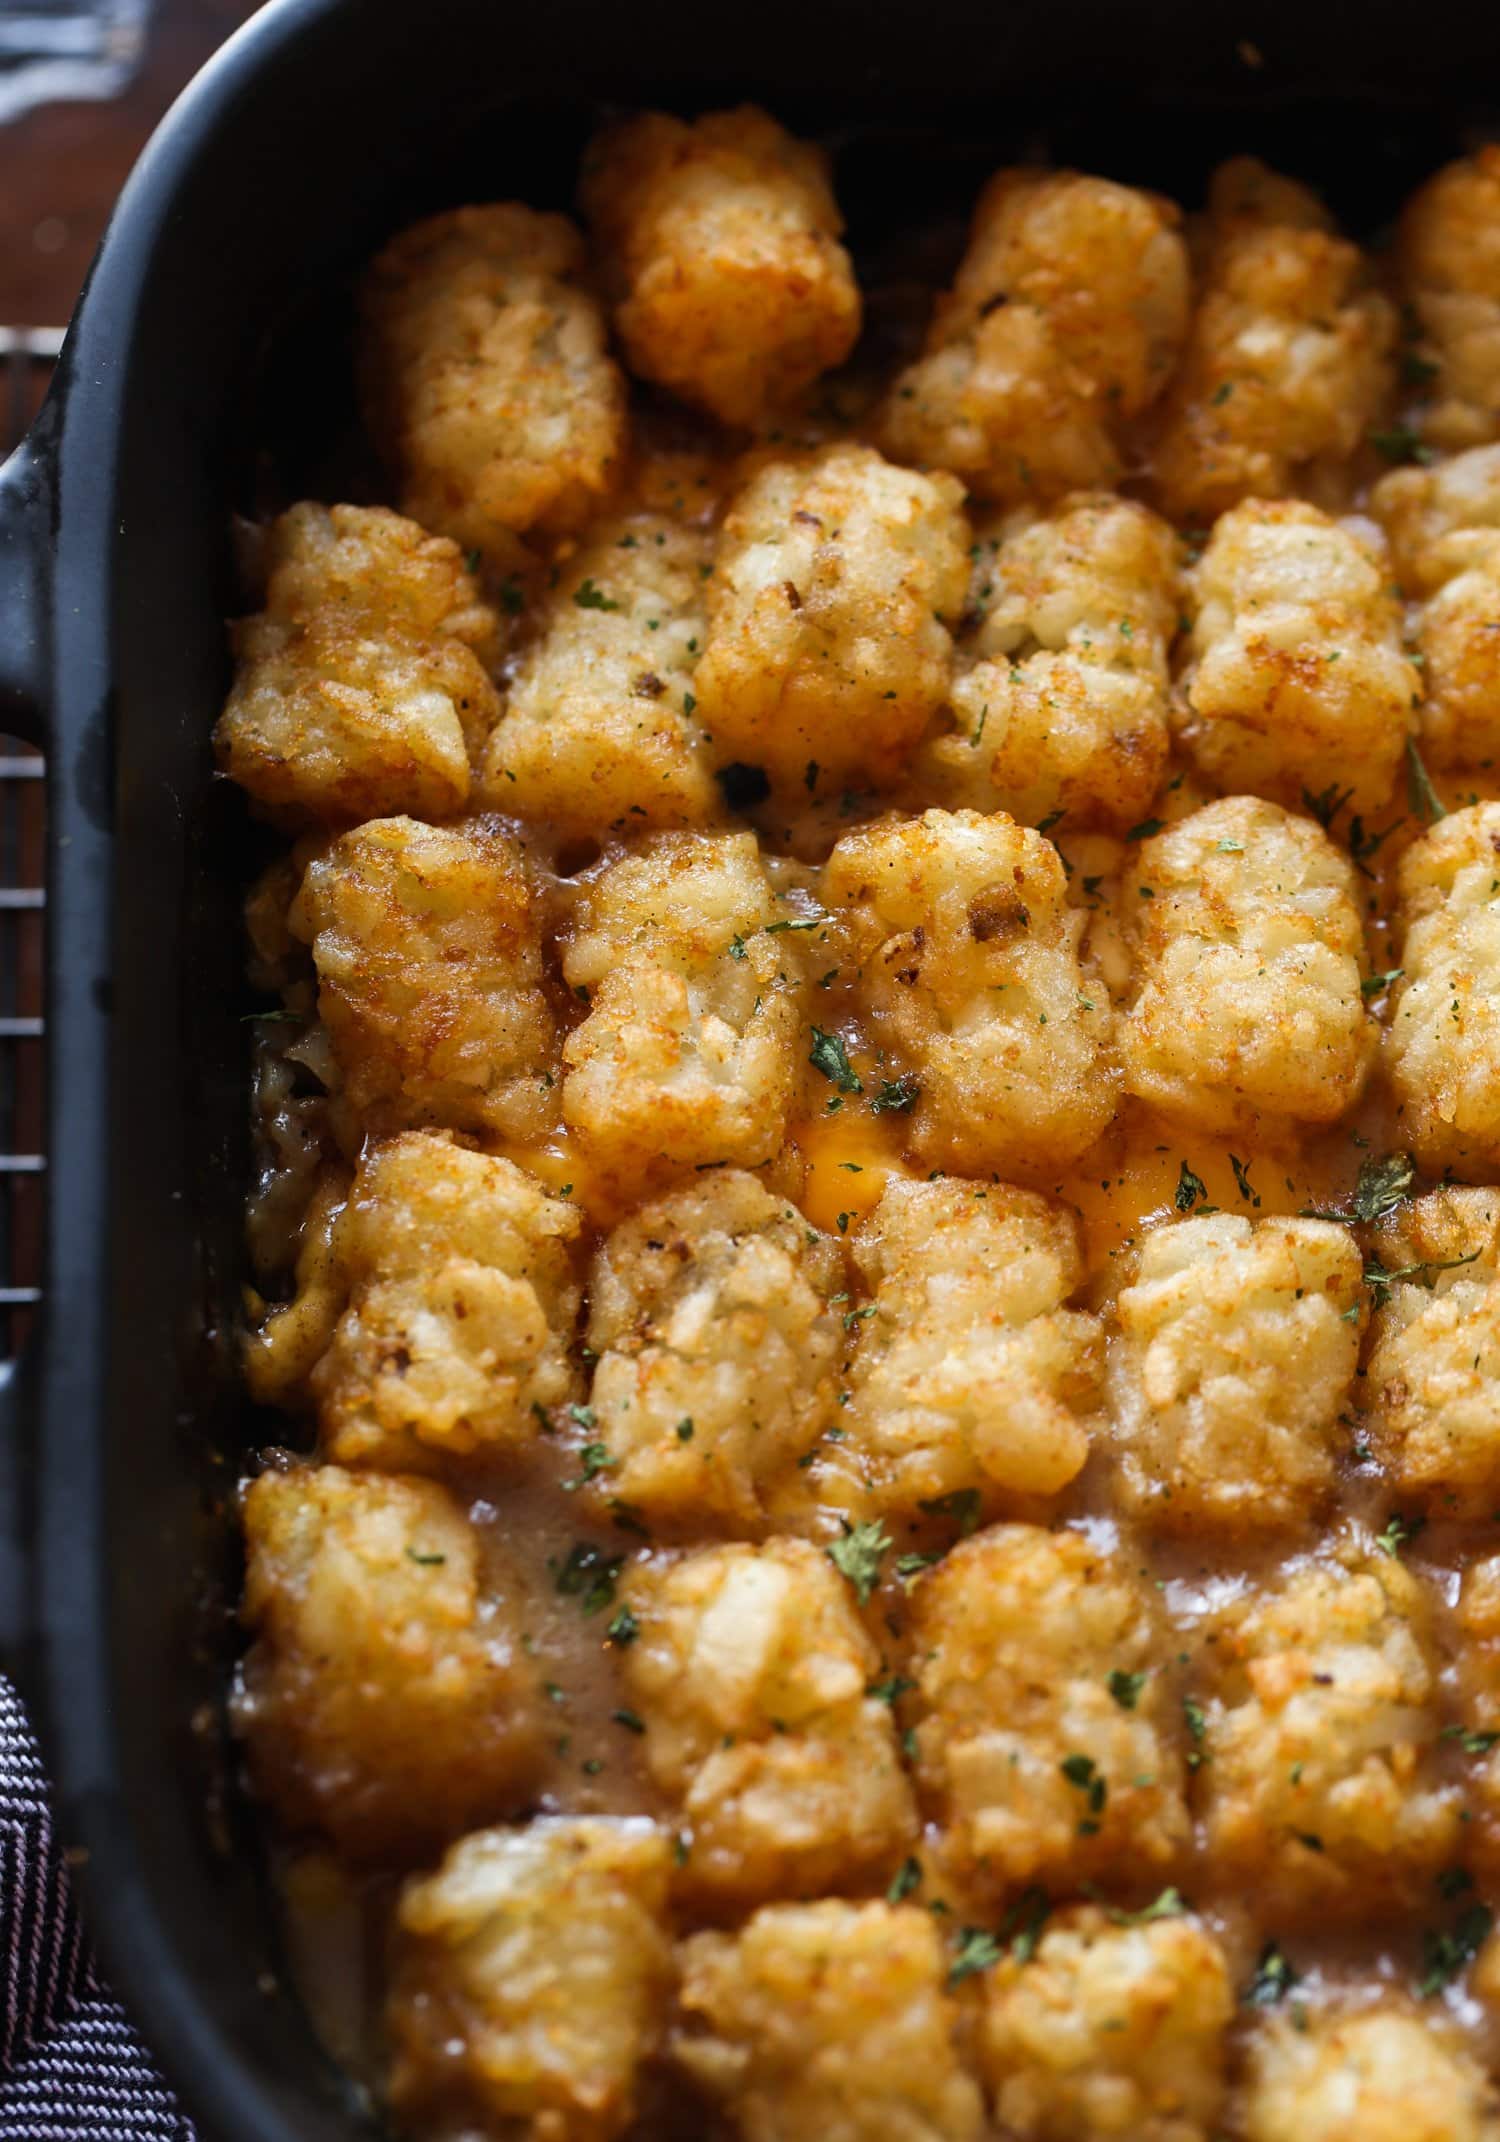 Baked tater tot casserole in a pan from above